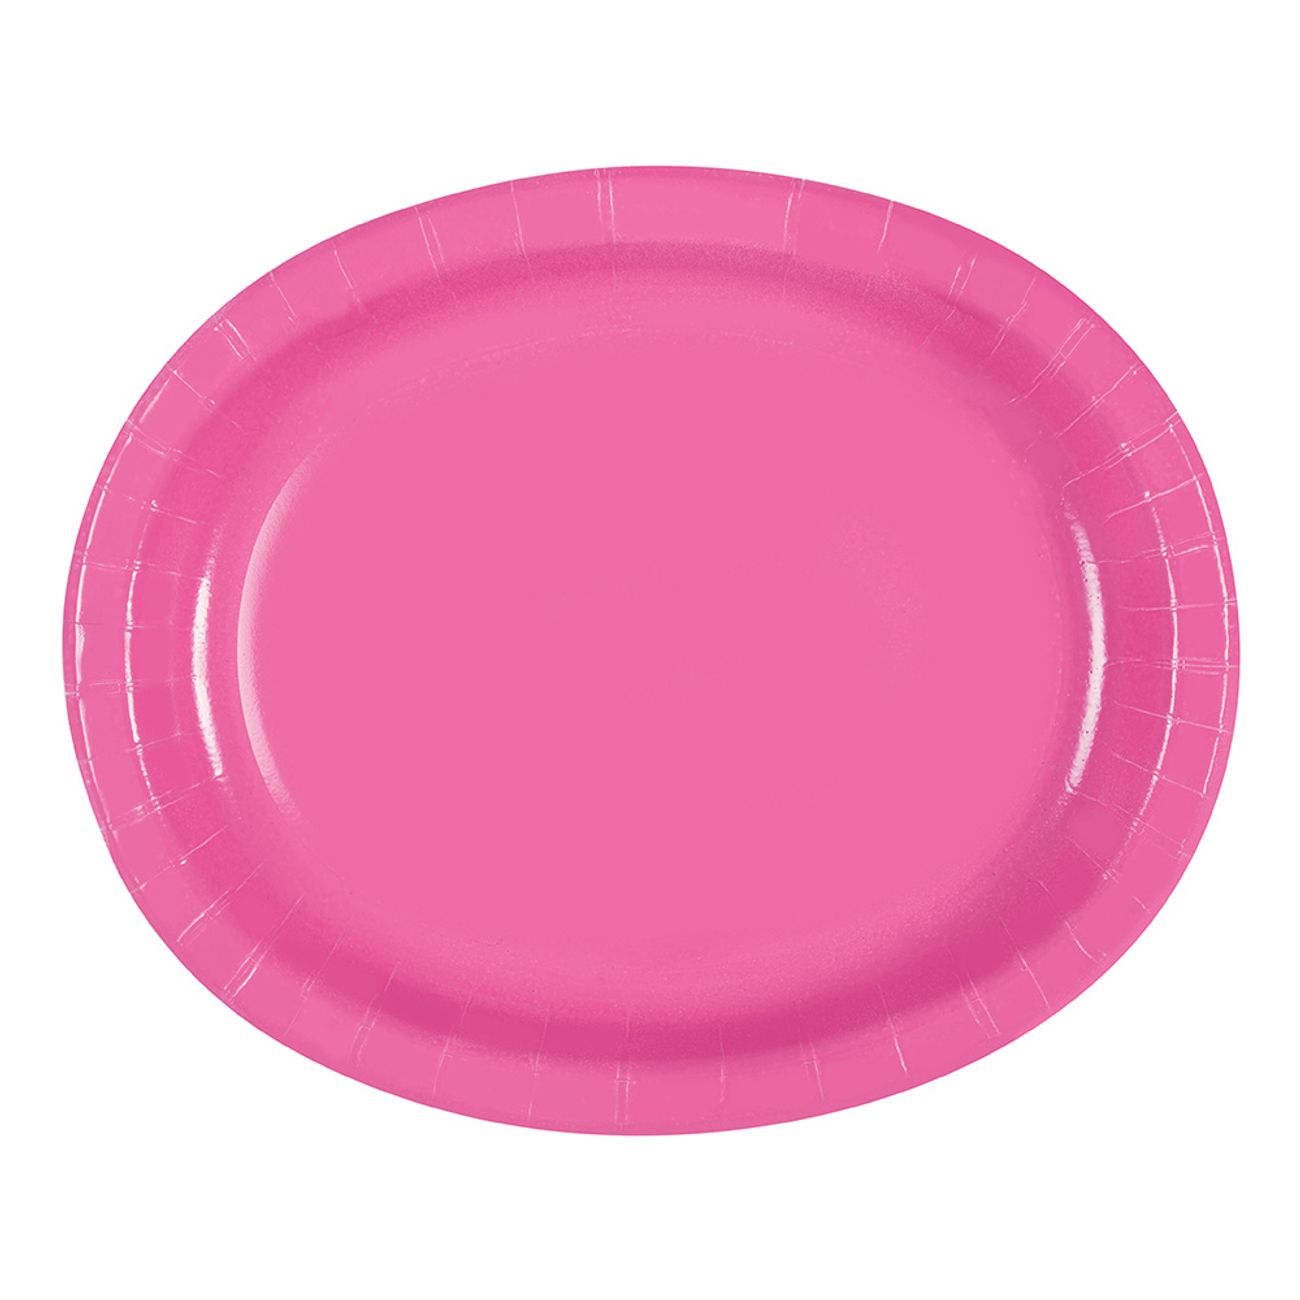 pappersfat-oval-rosa-1